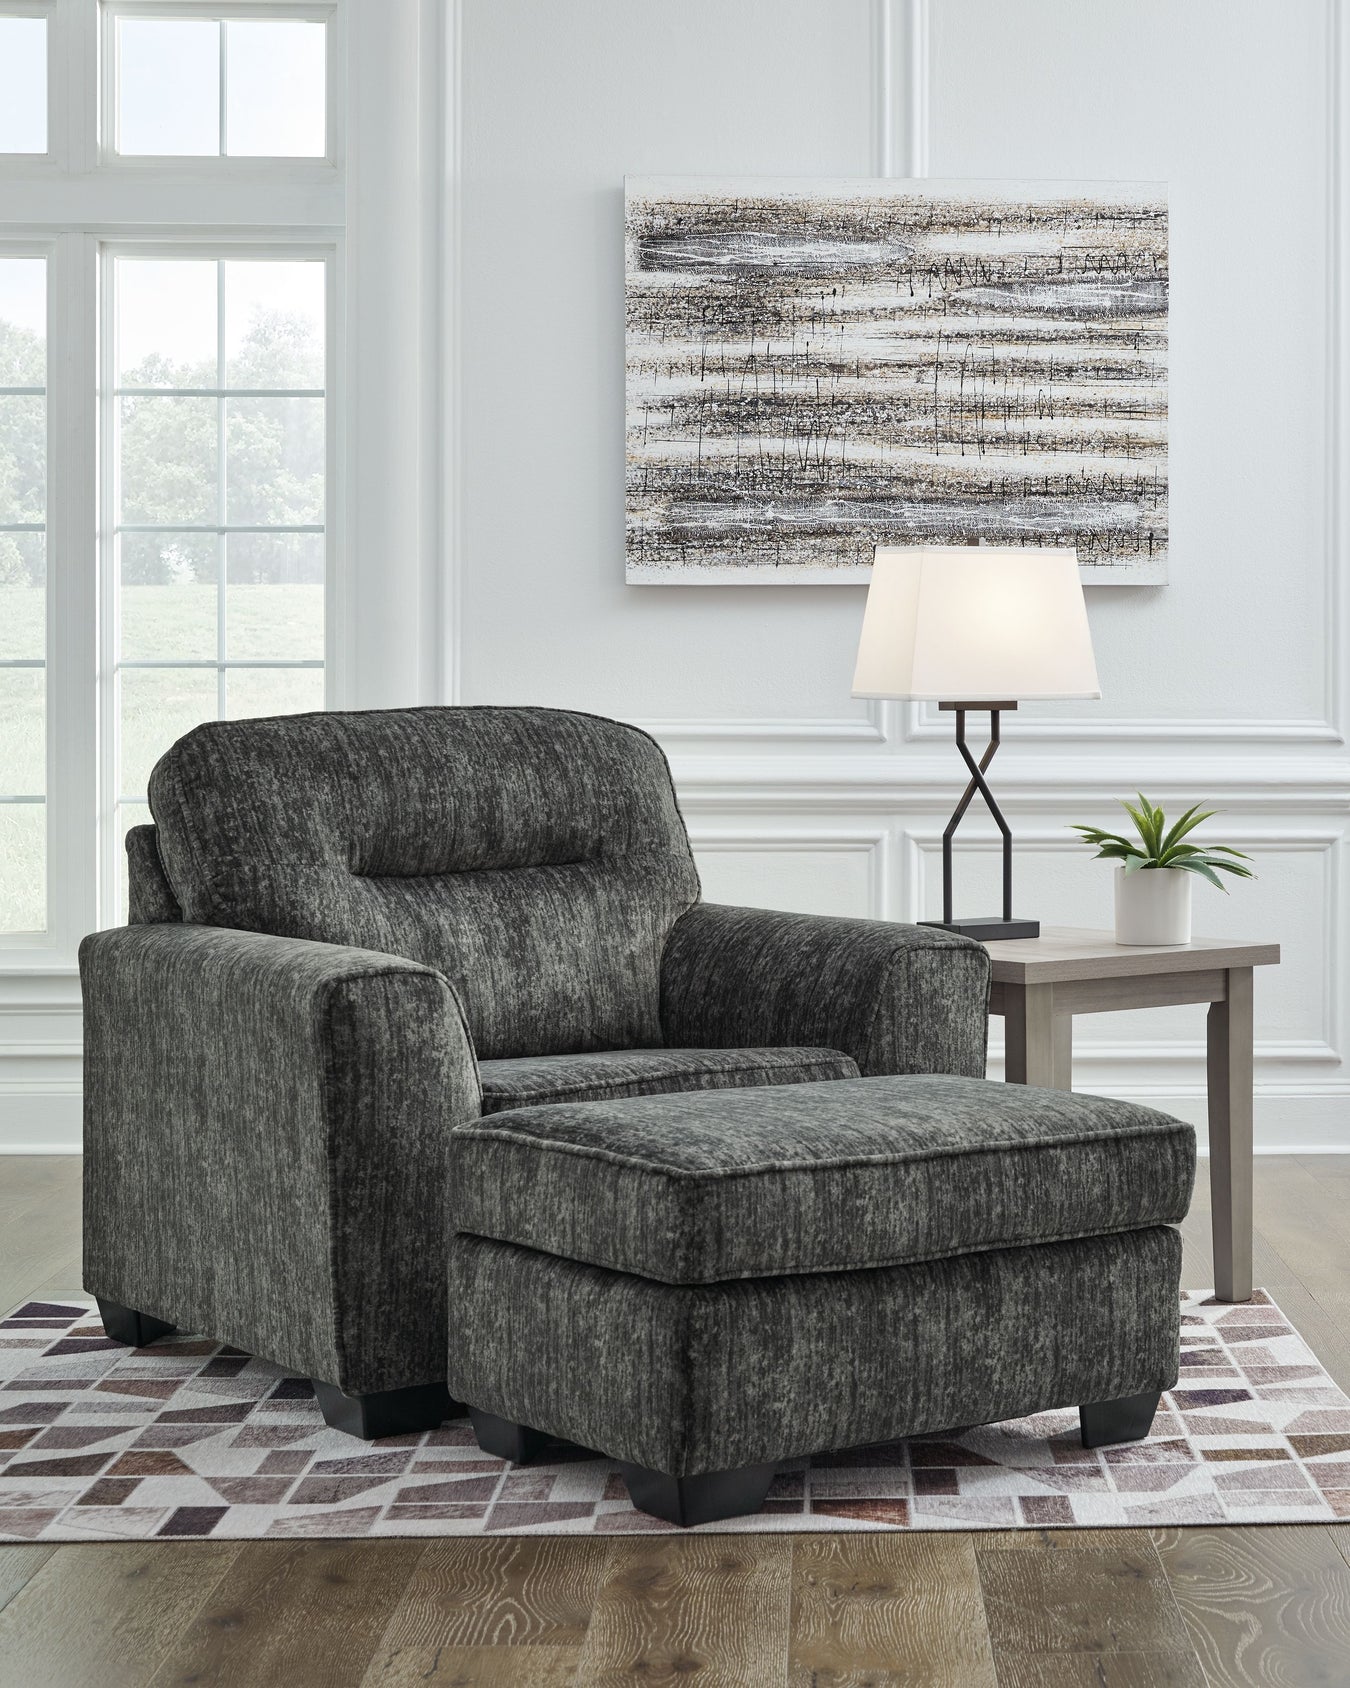 Tifton 2024 Spring Stationary Sofas, Loveseats, Chairs, Sectionals